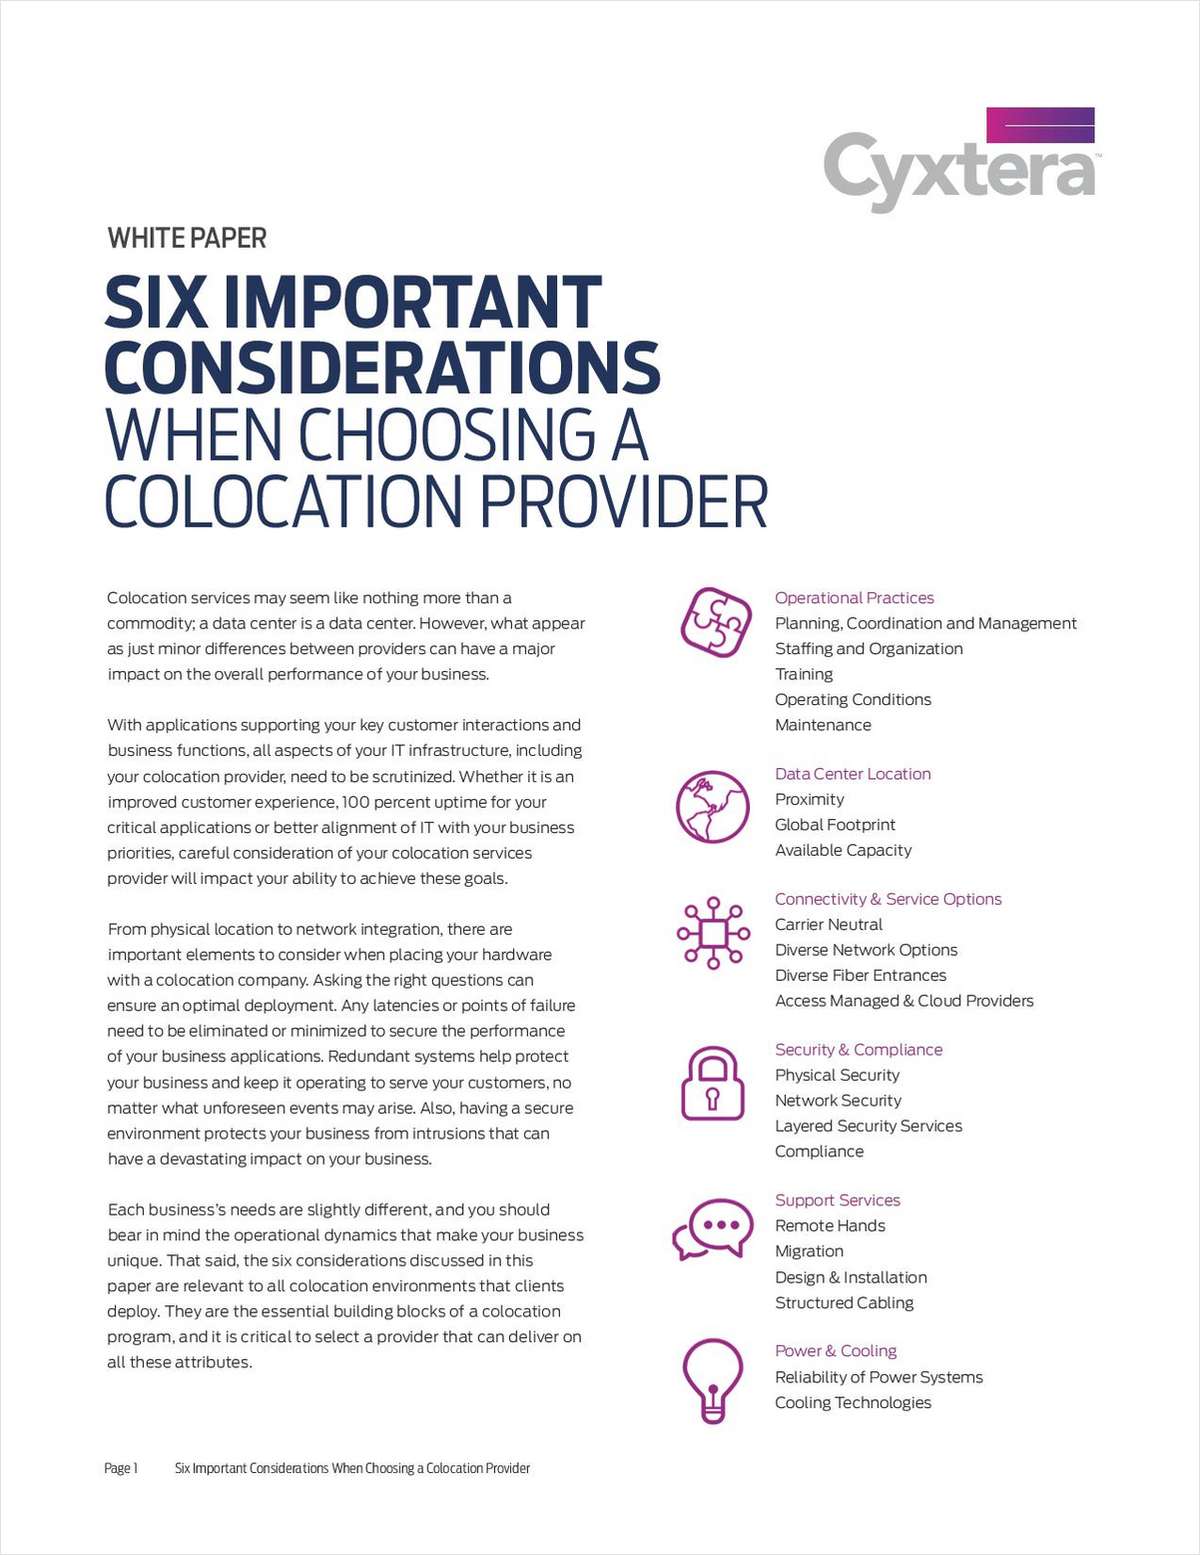 Six Important Considerations When Choosing a Colocation Provider